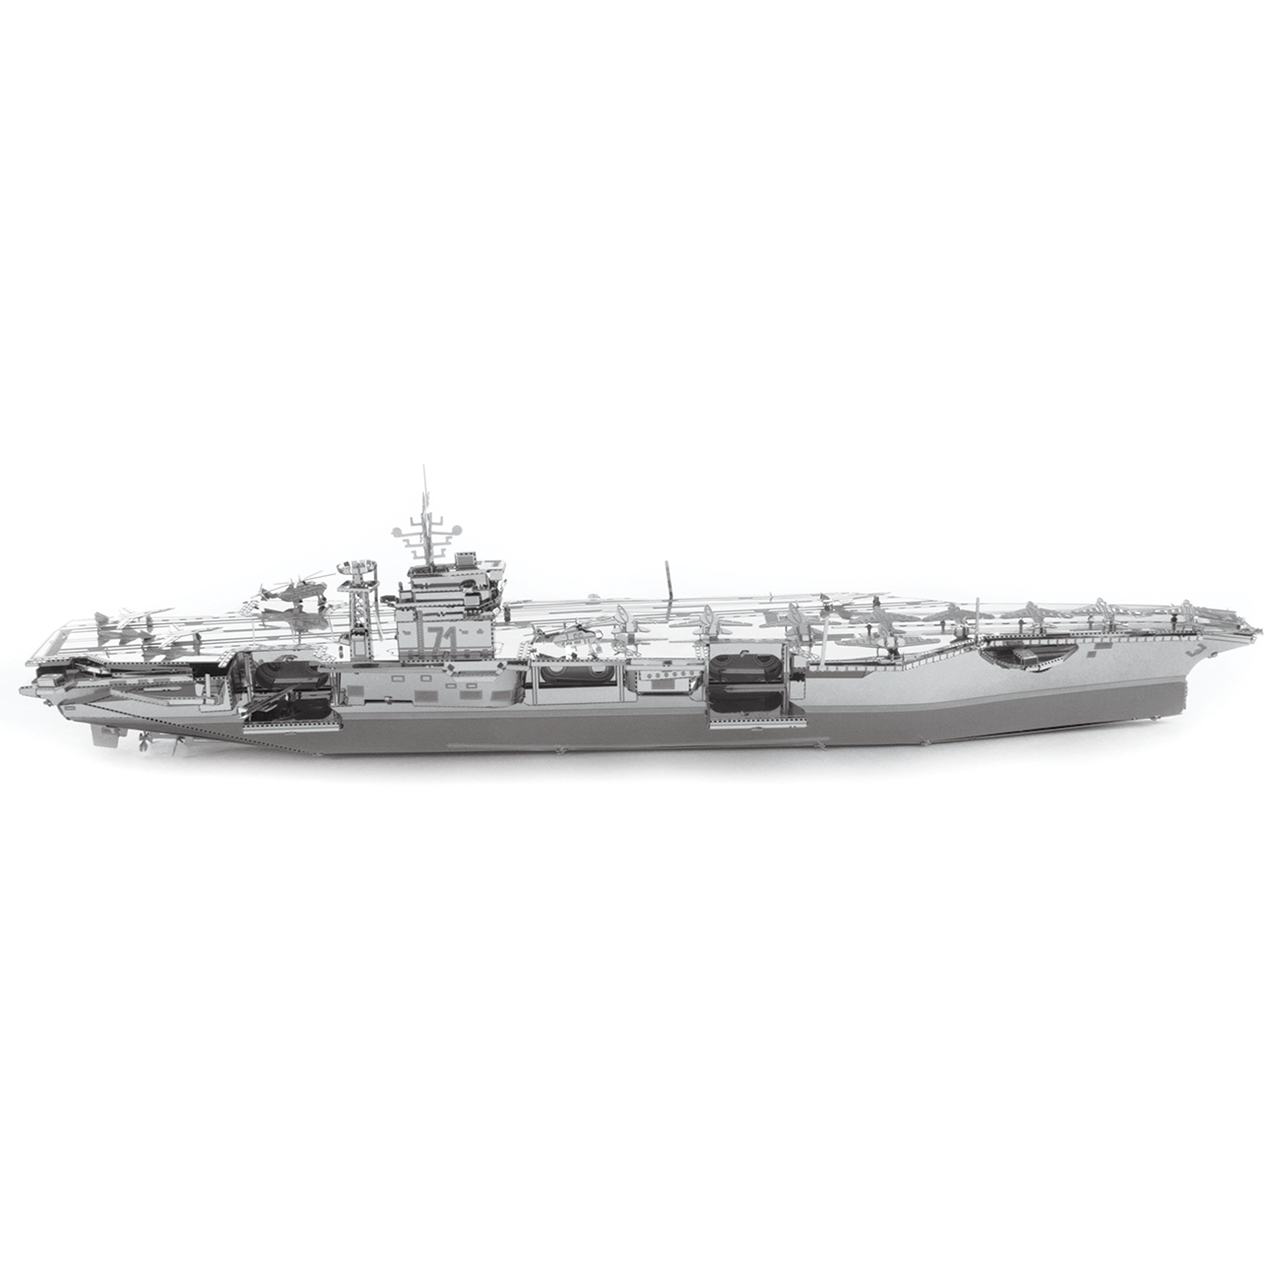 Fascinations Metal Earth ICONX USS THEODORE ROOSEVELT CVN-71 AIRCRAFT CARRIER 